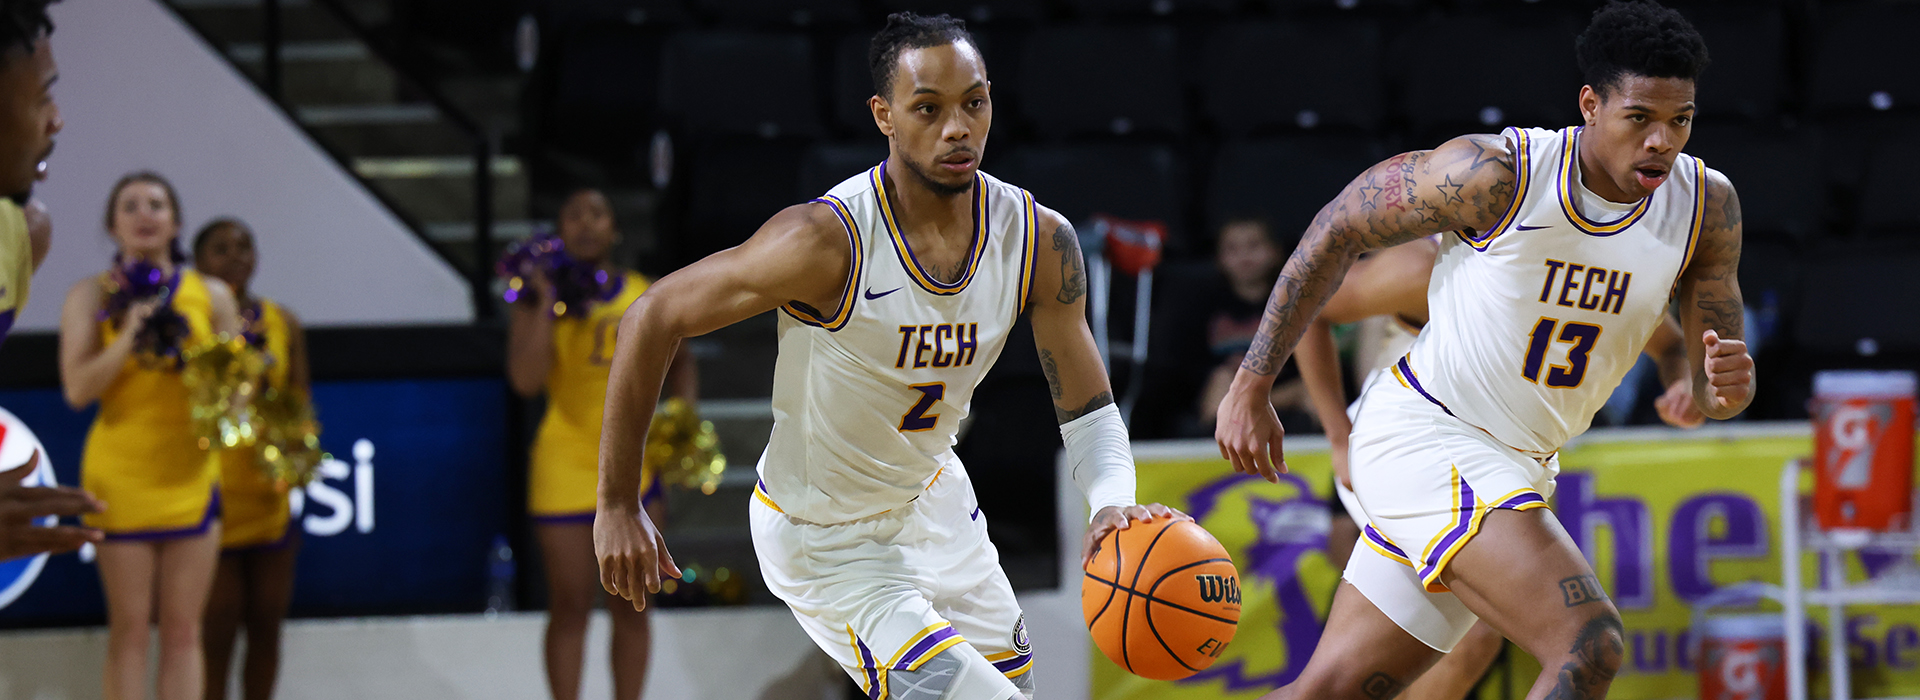 Sebree recognized as OVC Player of the Week for first time